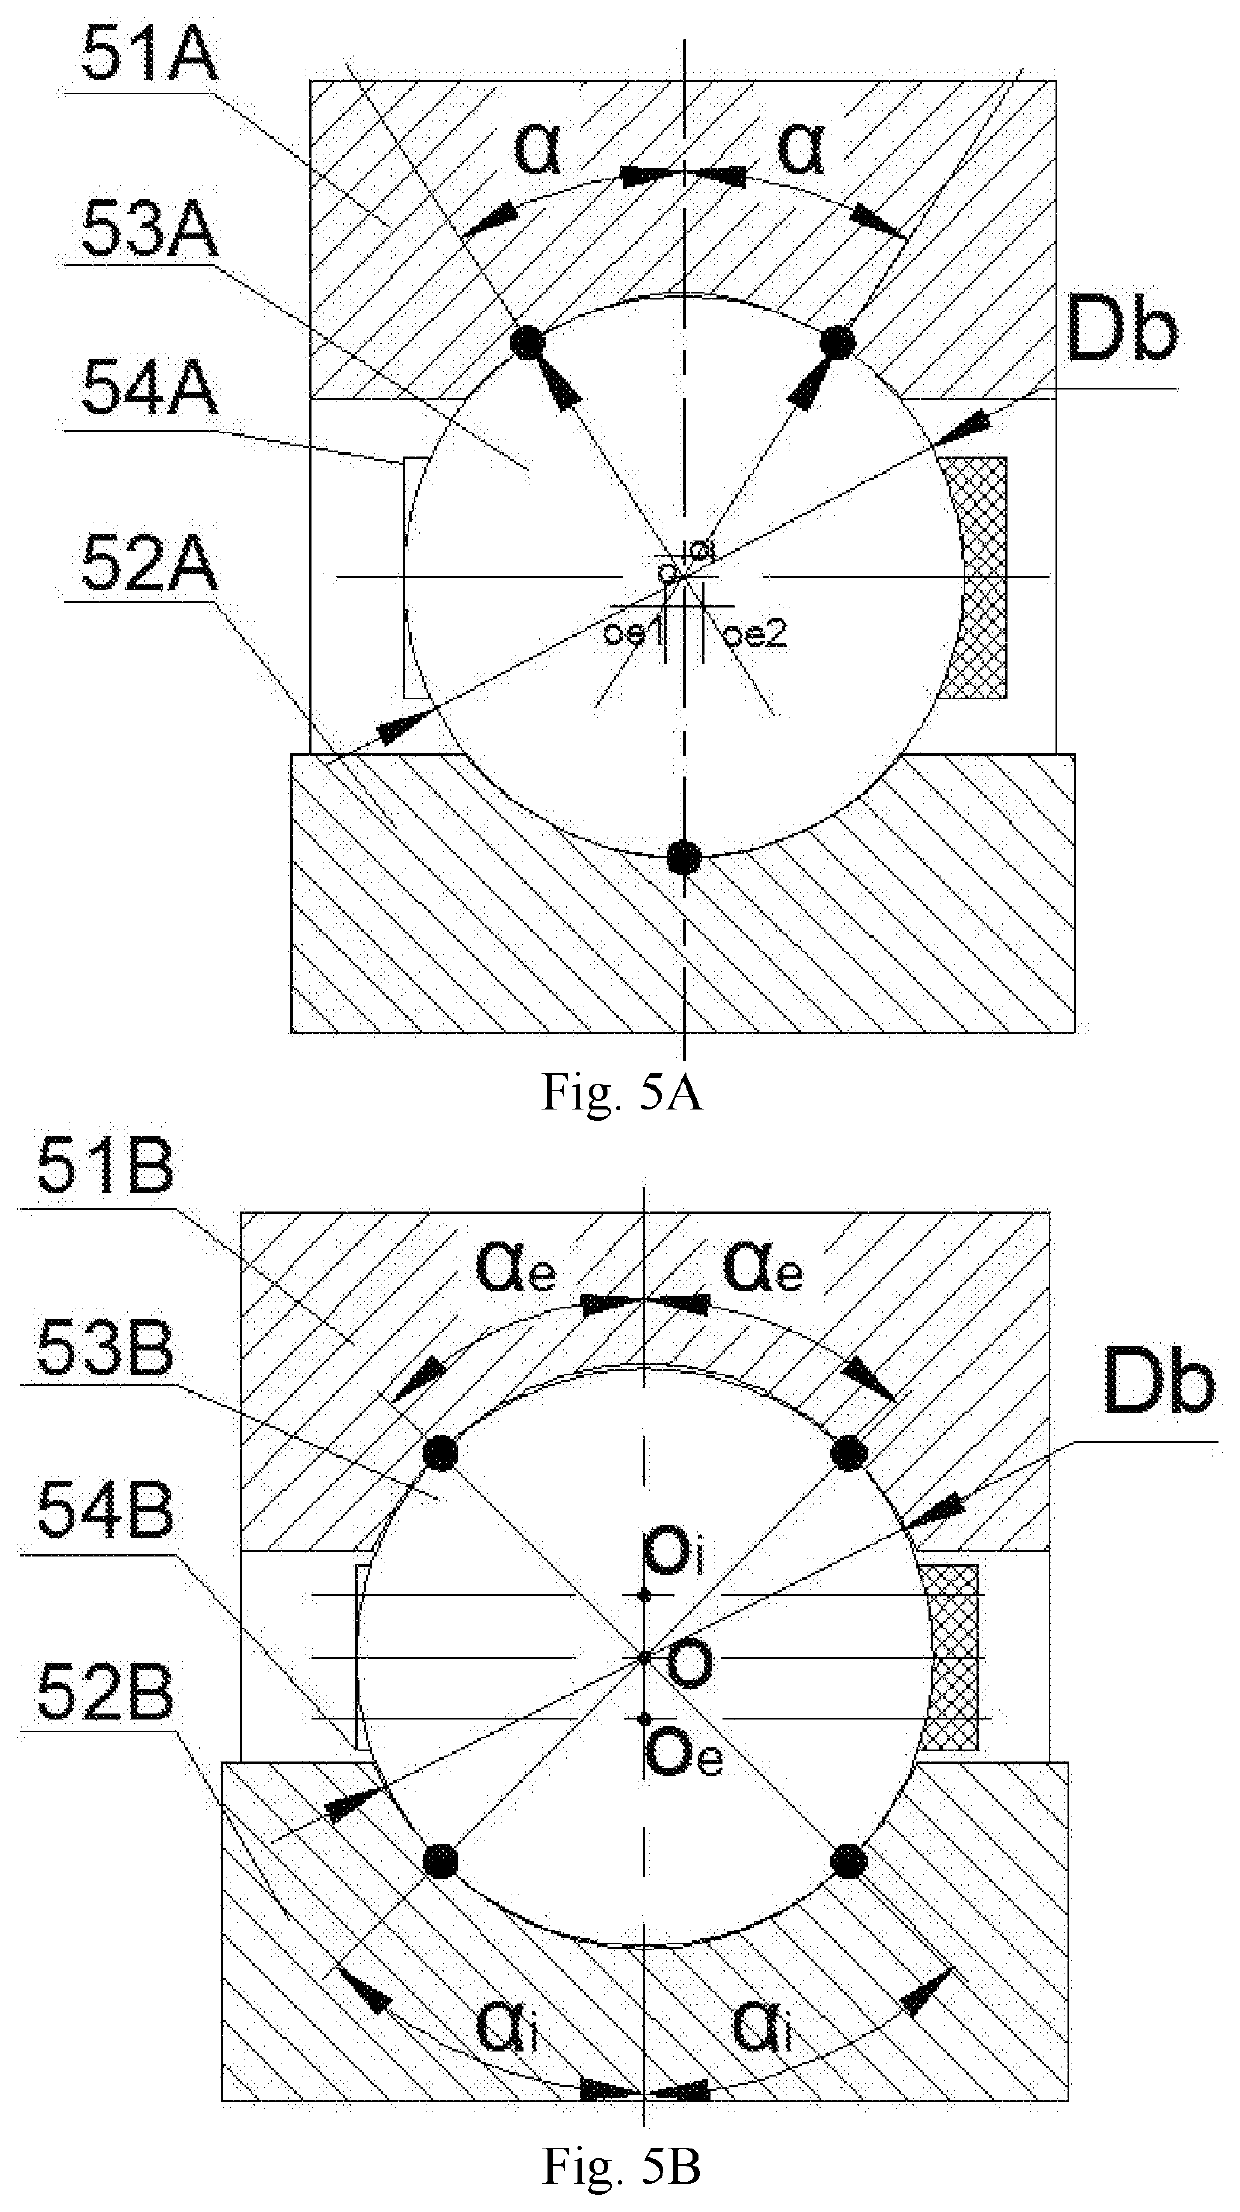 Multiple contact-point flexible bearing applicable to a harmonic drive